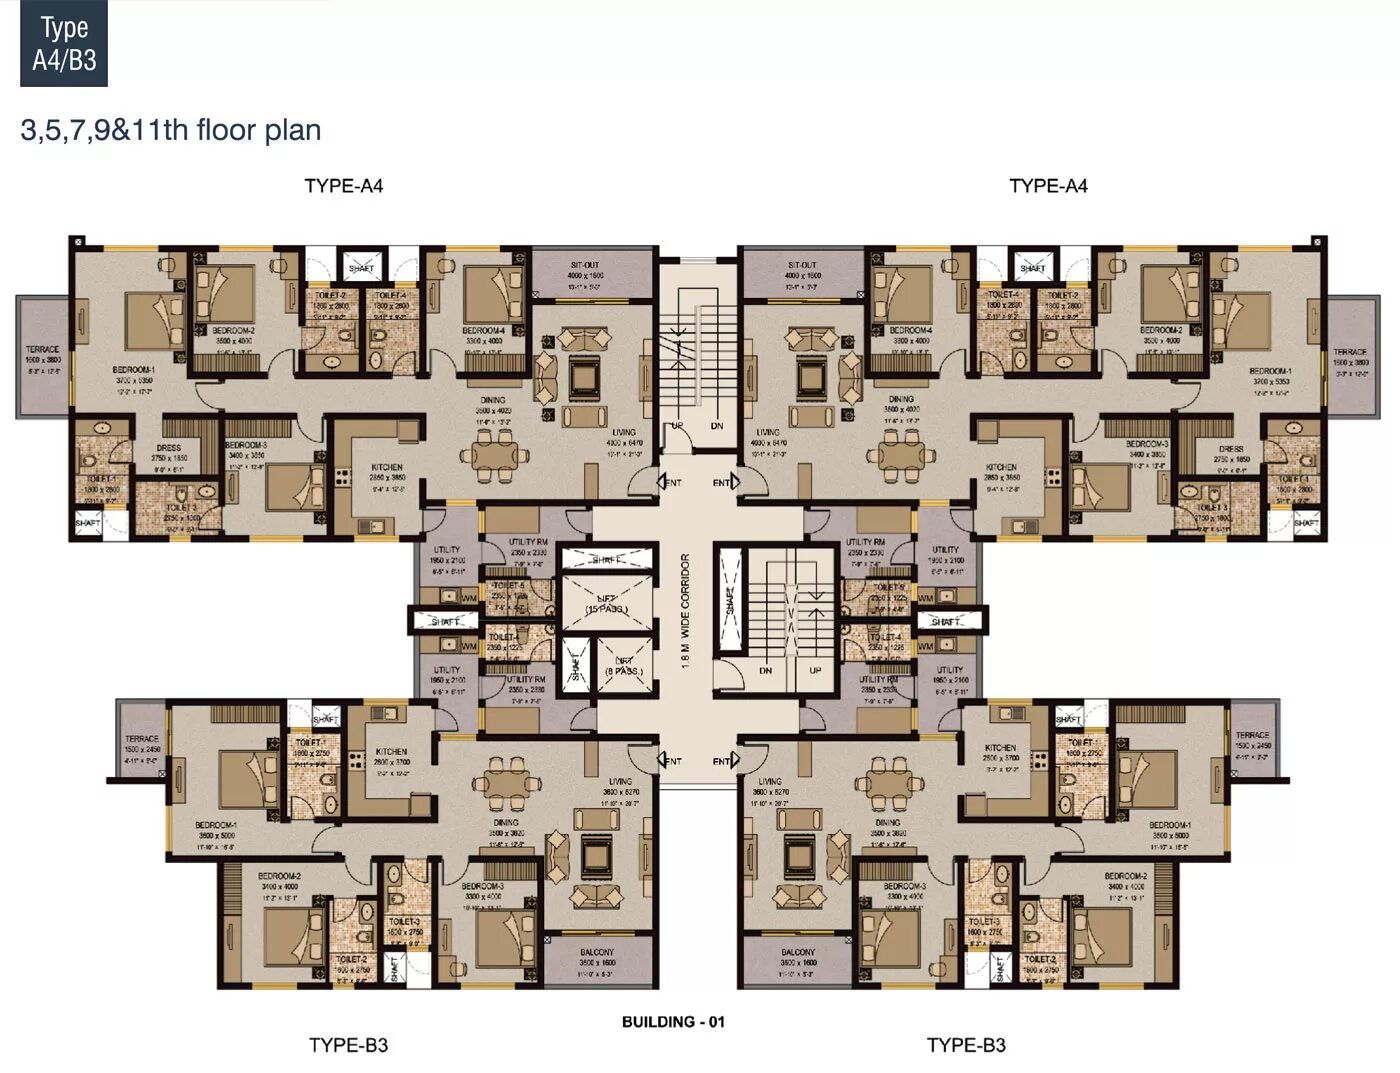 Apartment Floor Plan. Residential building Plan. Floor Plan of a residential building. Apartment Plan Plan. Planning for a building